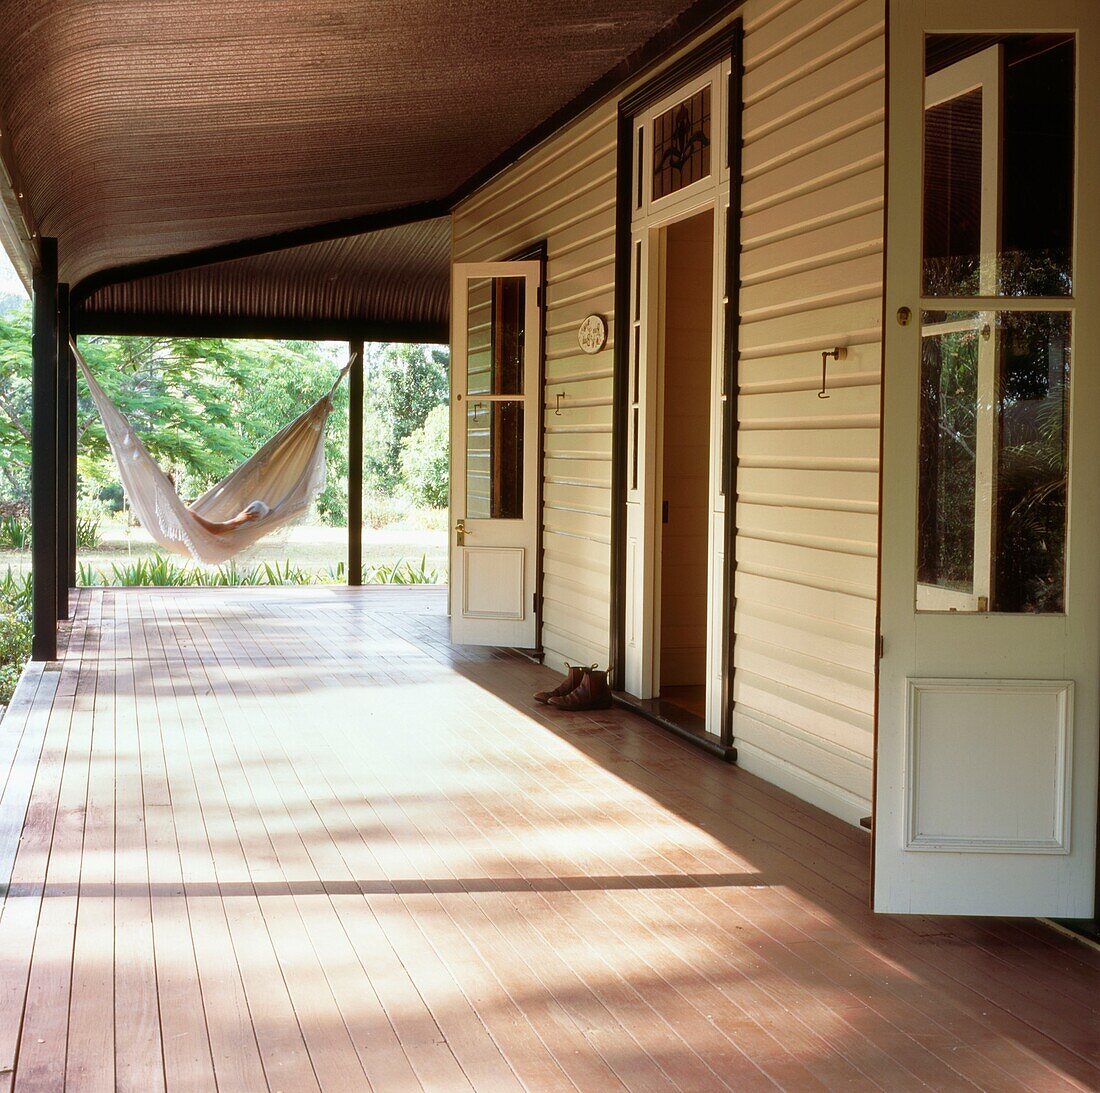 Wood panelled colonial country style house with large veranda French windows and a hammock in dappled sunlight